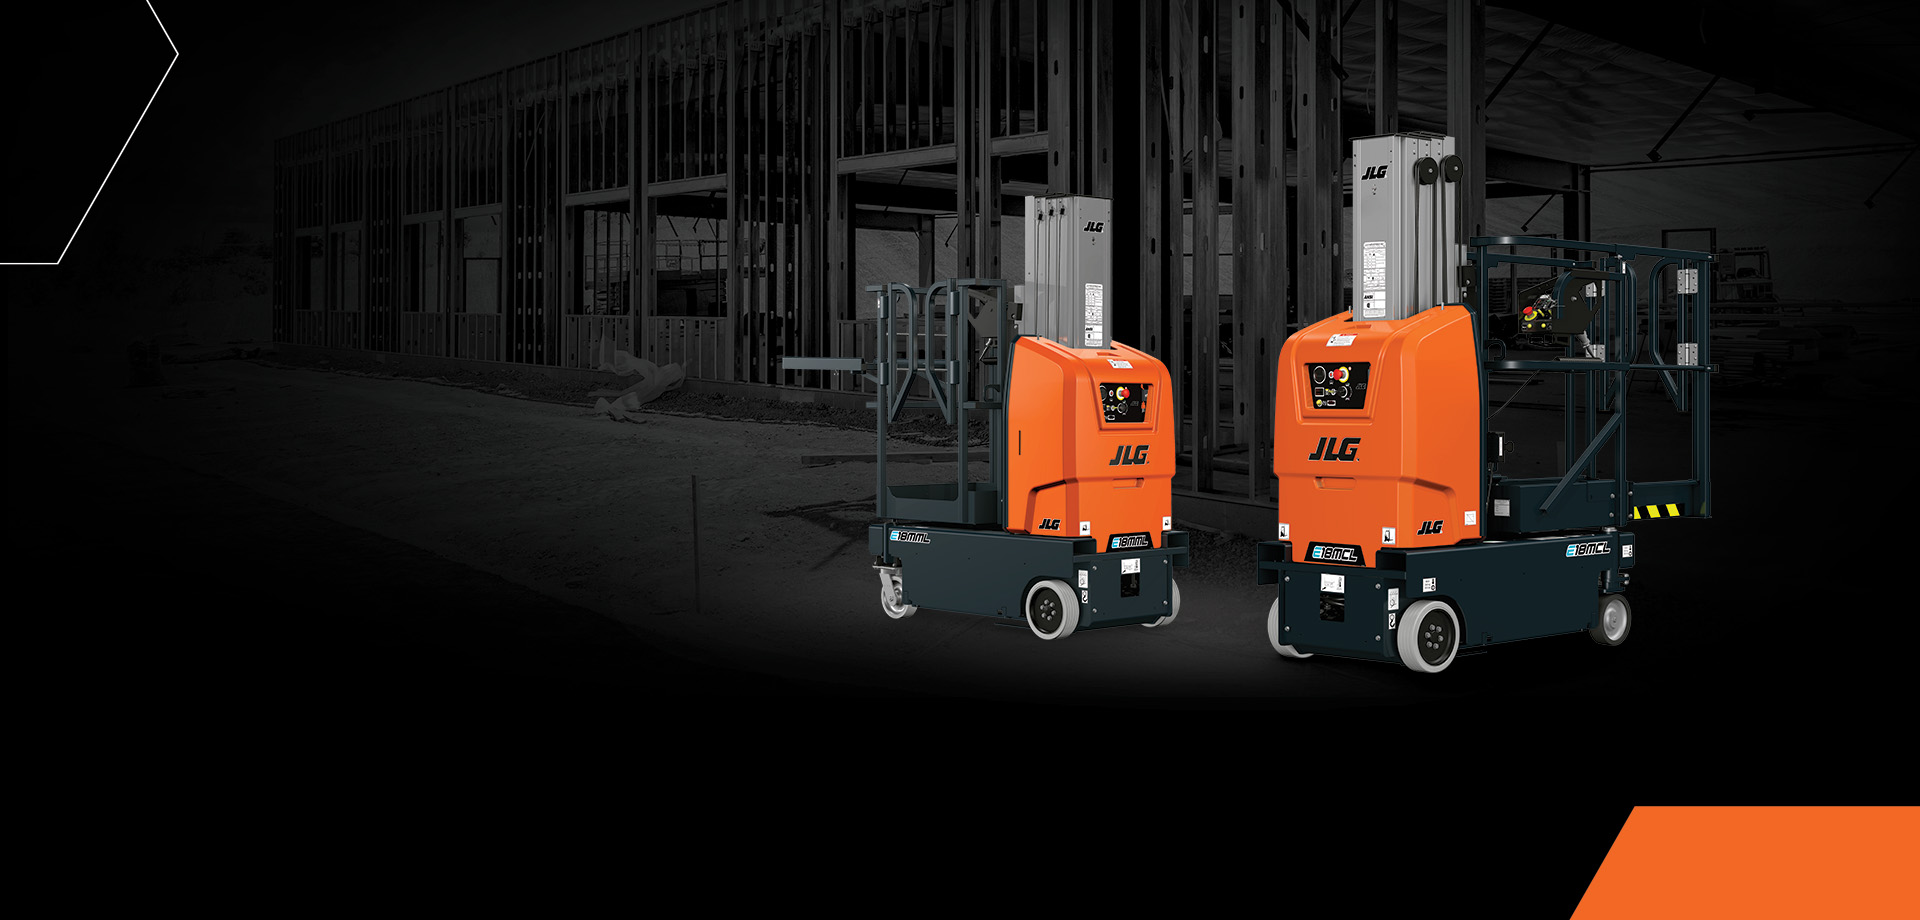 JLG Lift Equipment Lift and Equipment Manufacturer US and Canada picture